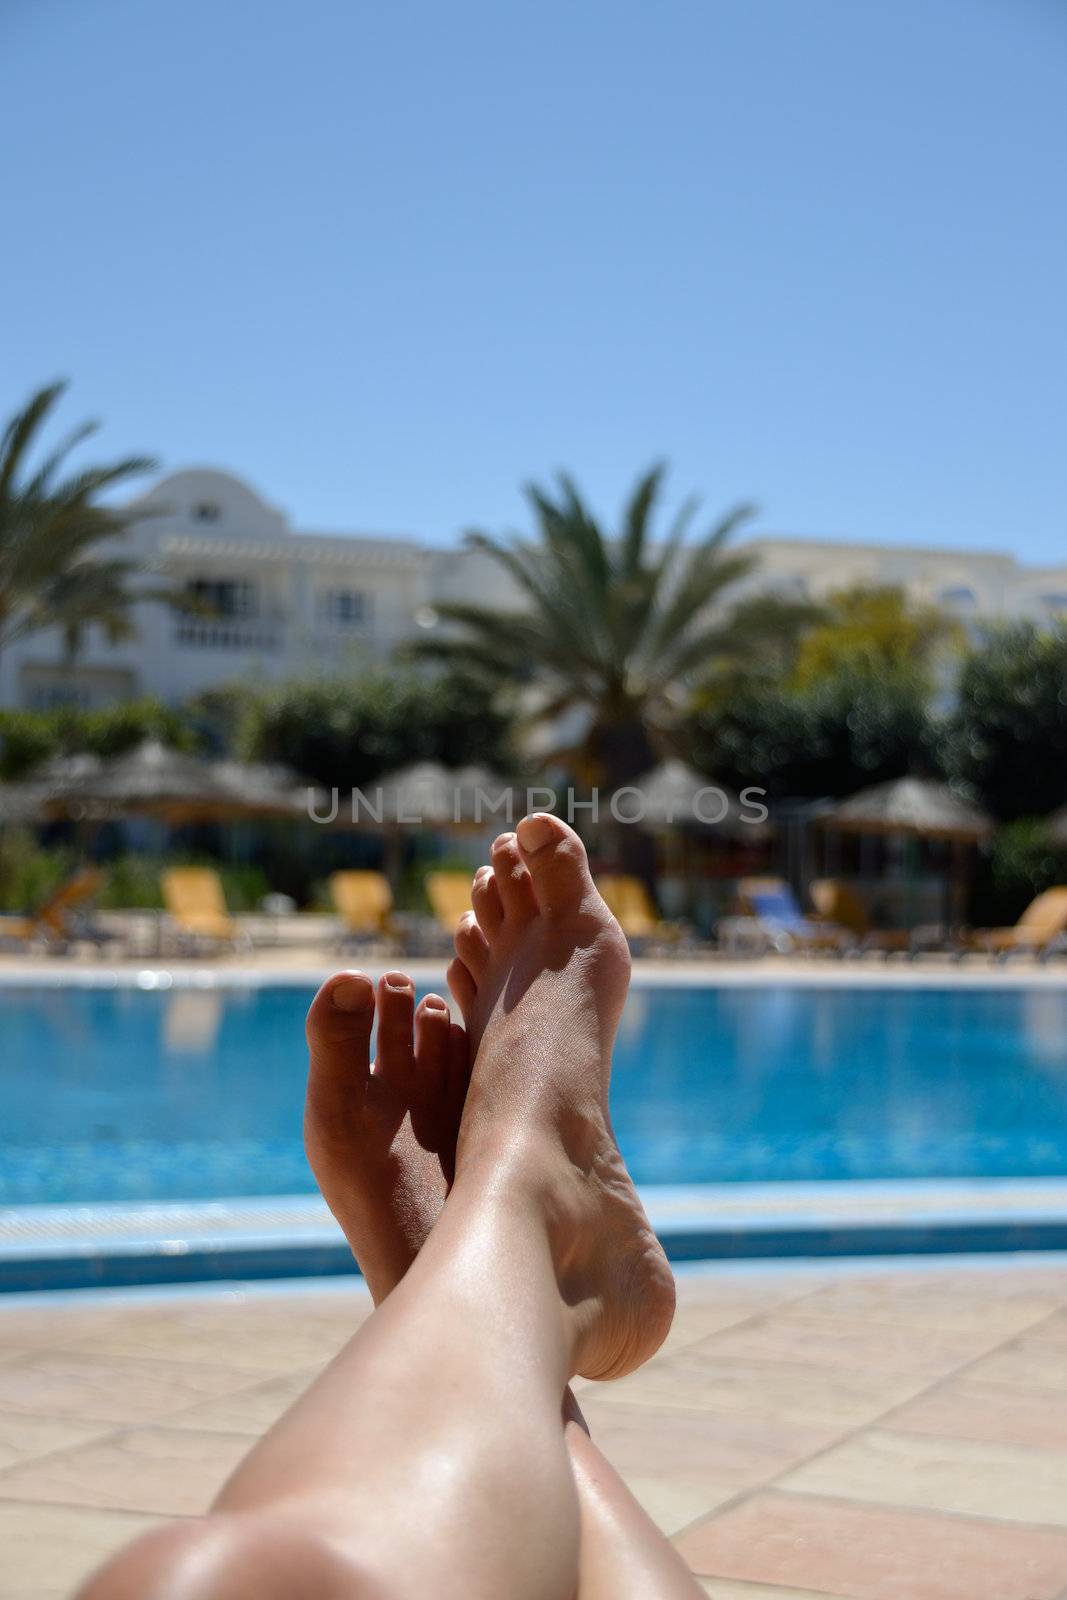 Legs of young woman relaxing at tropical pool.